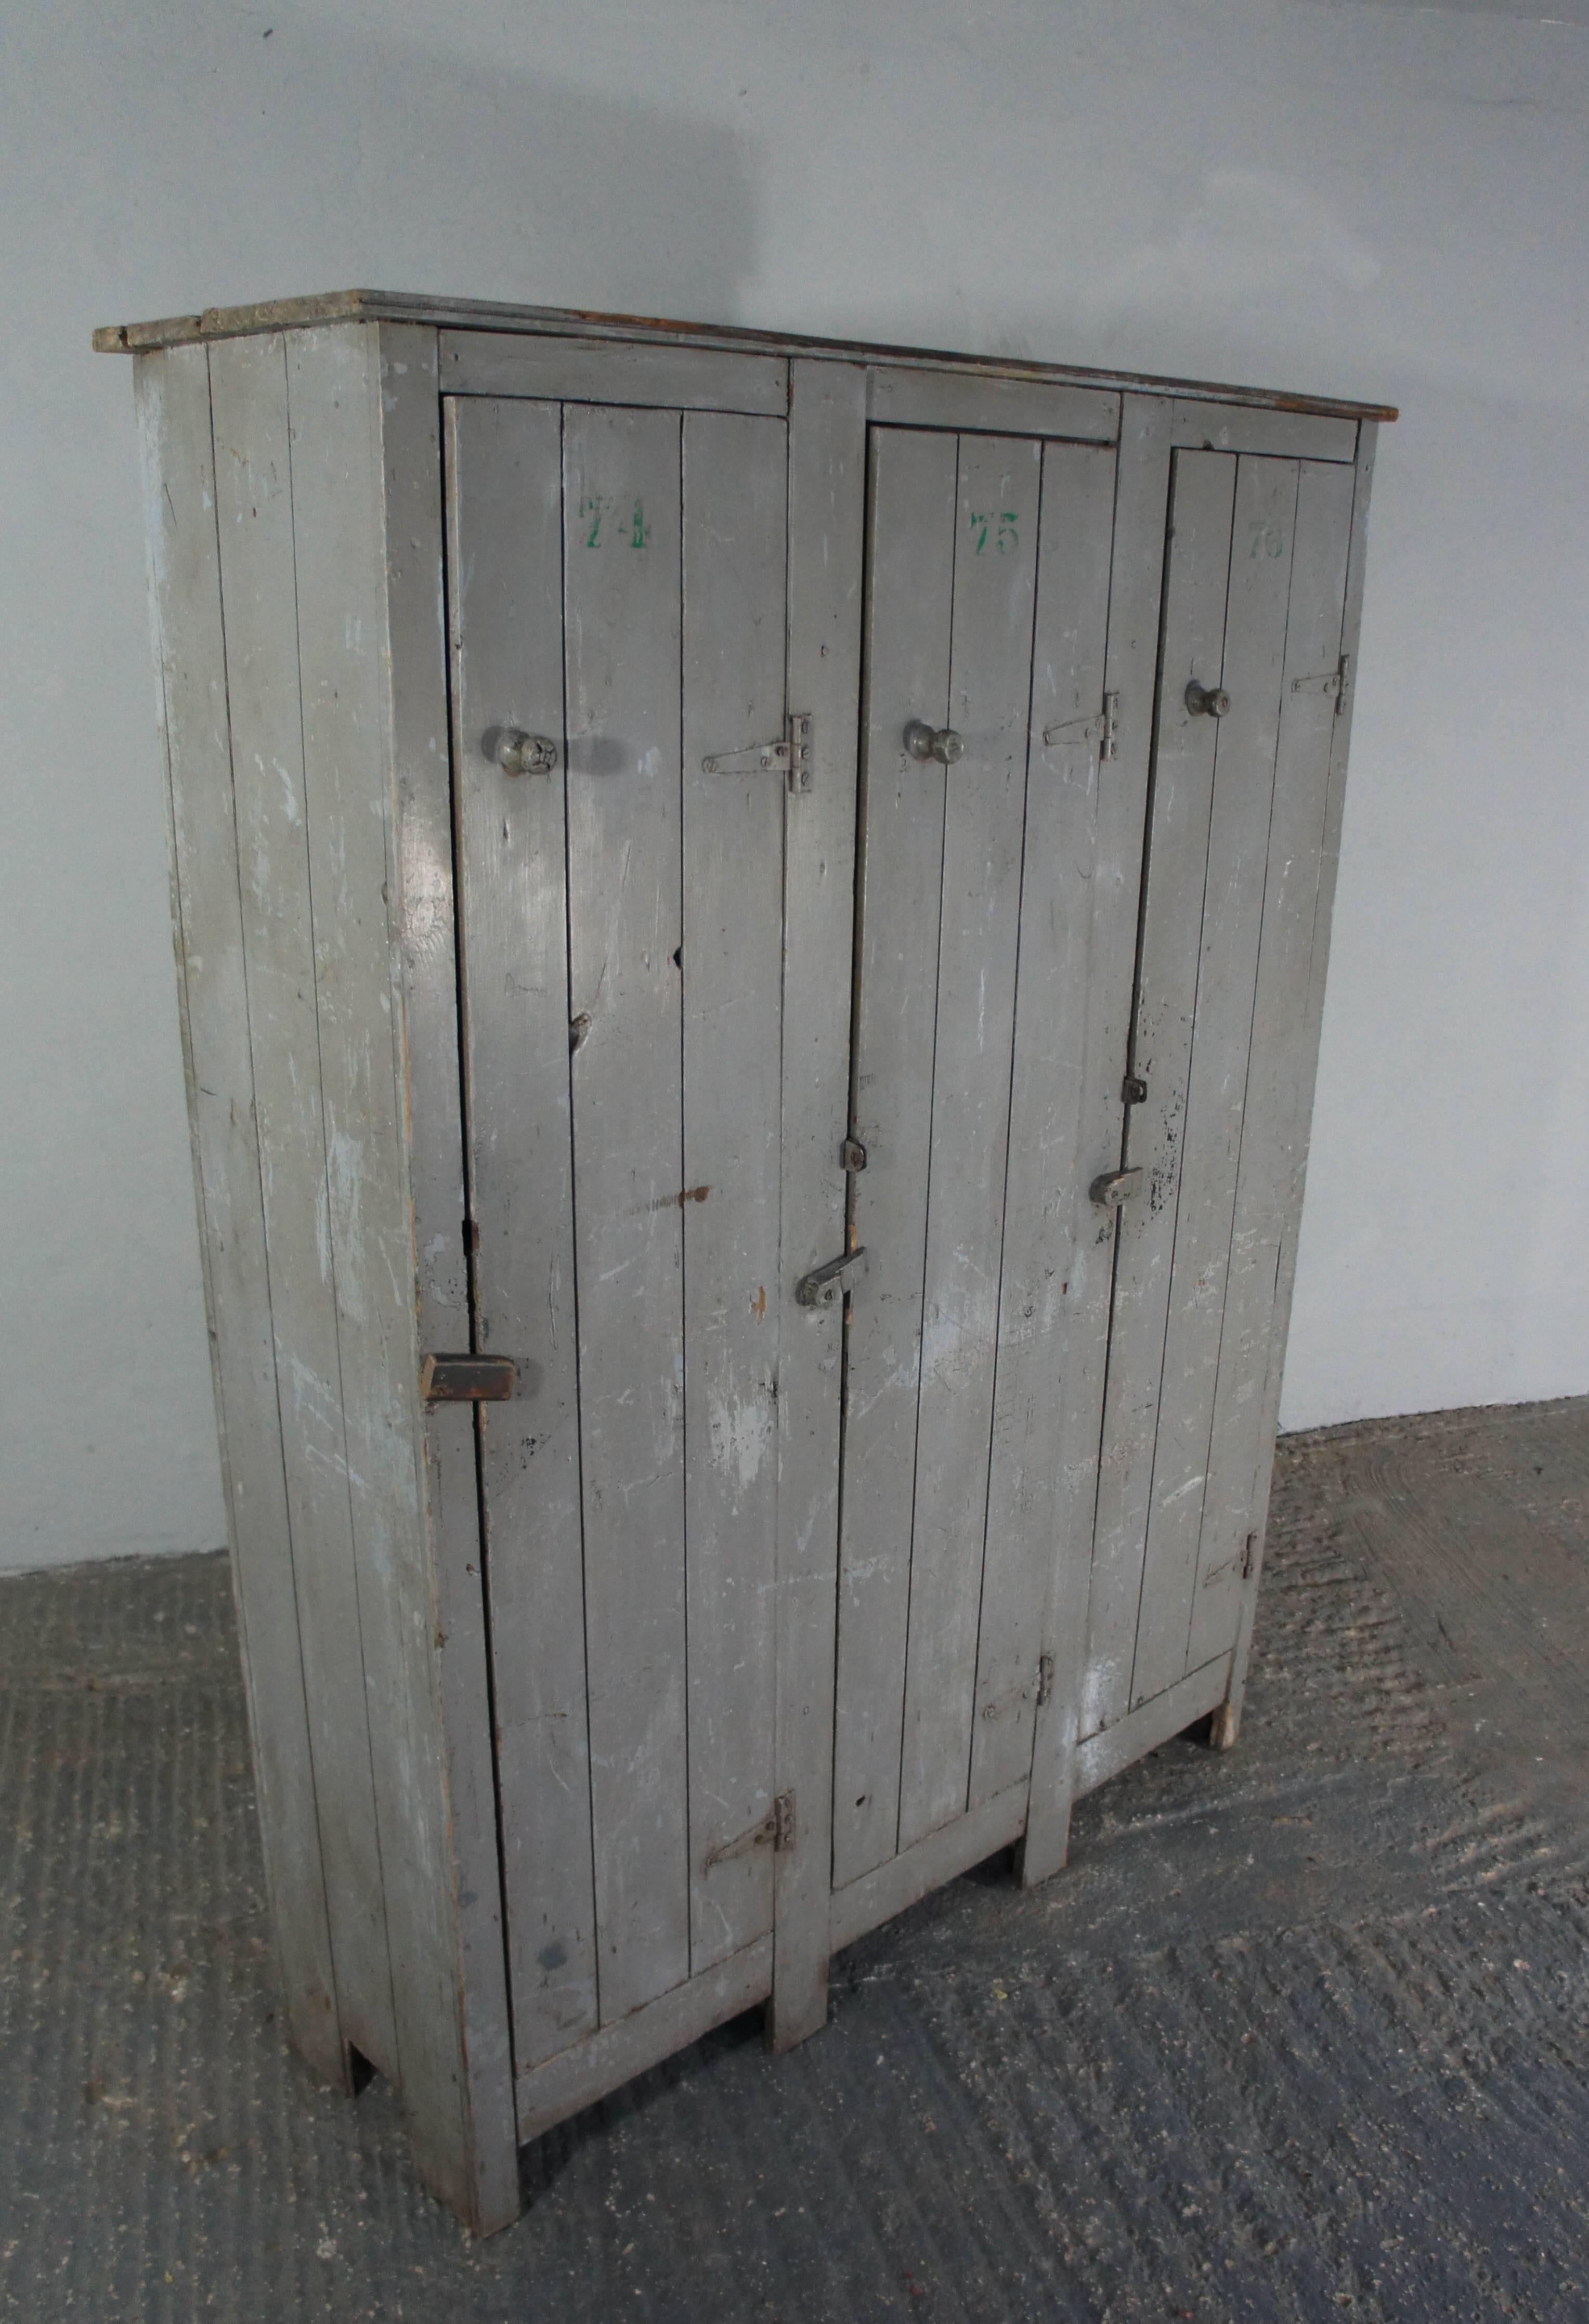 Great looking lockers in original pale grey paint. Great storage in three compartments which are divided into shelves inside. Each door has a number stencil. Clean and ready to use.